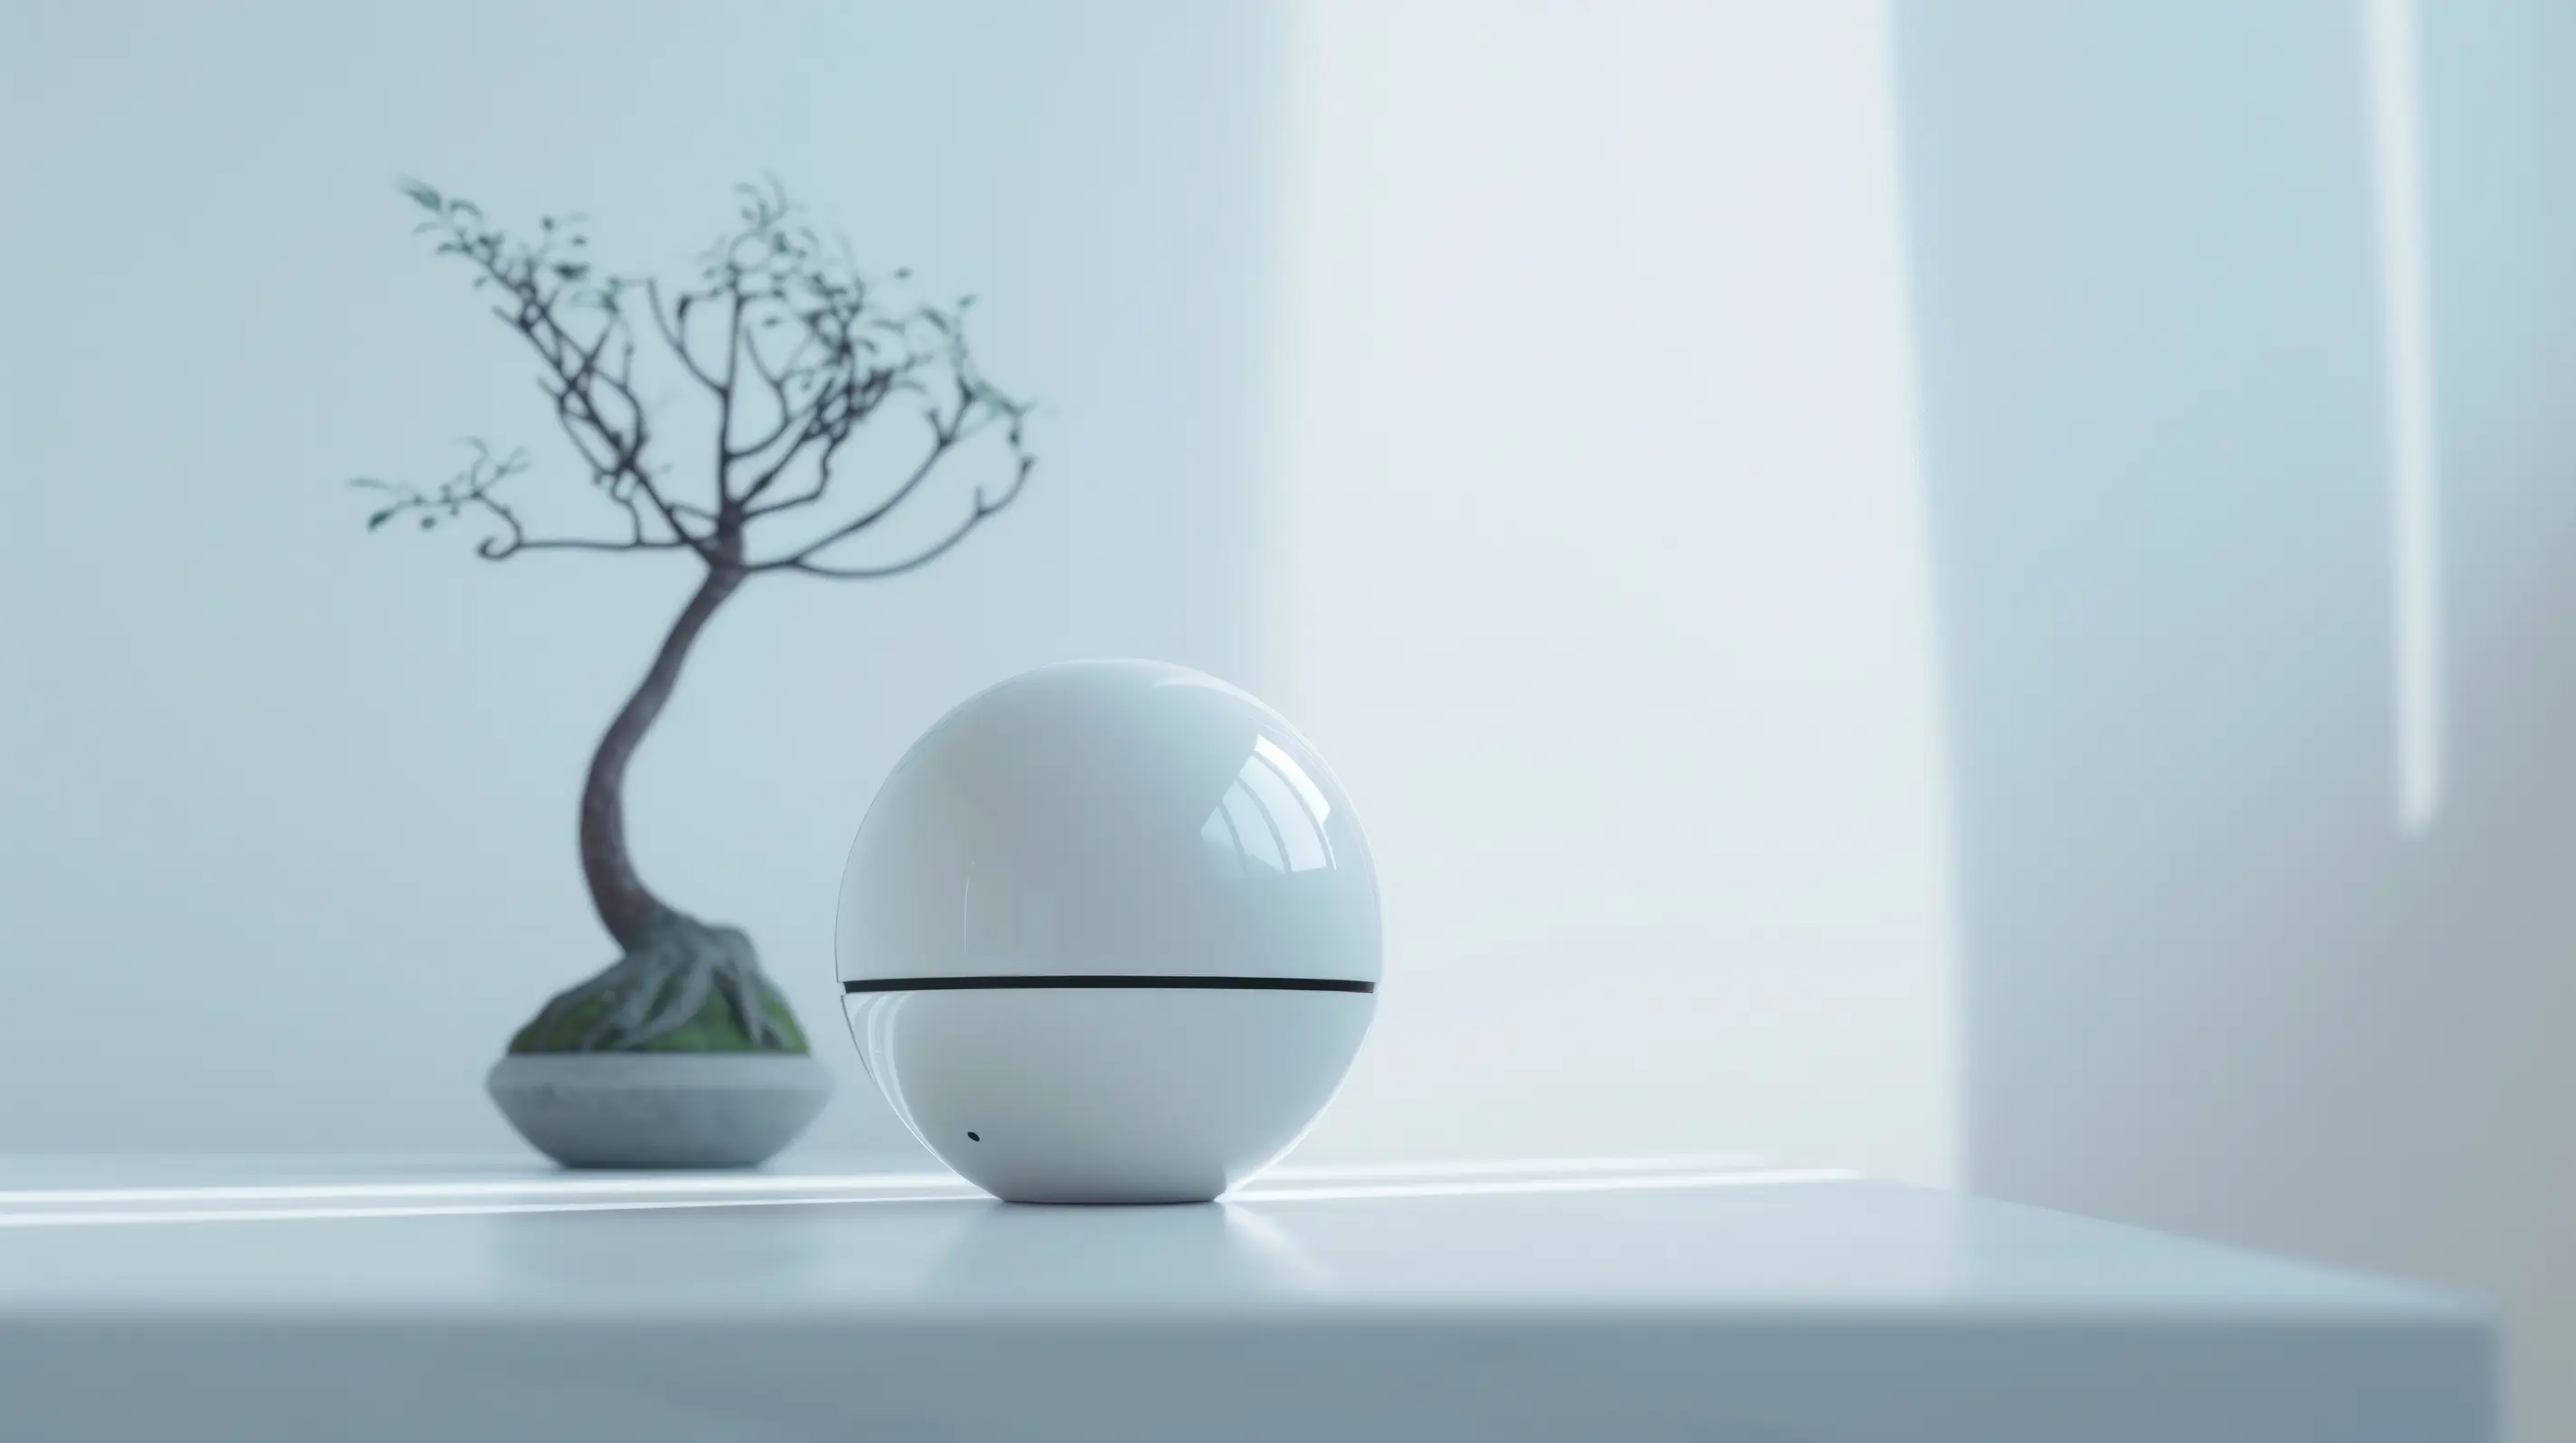 A white, spherical modern device.